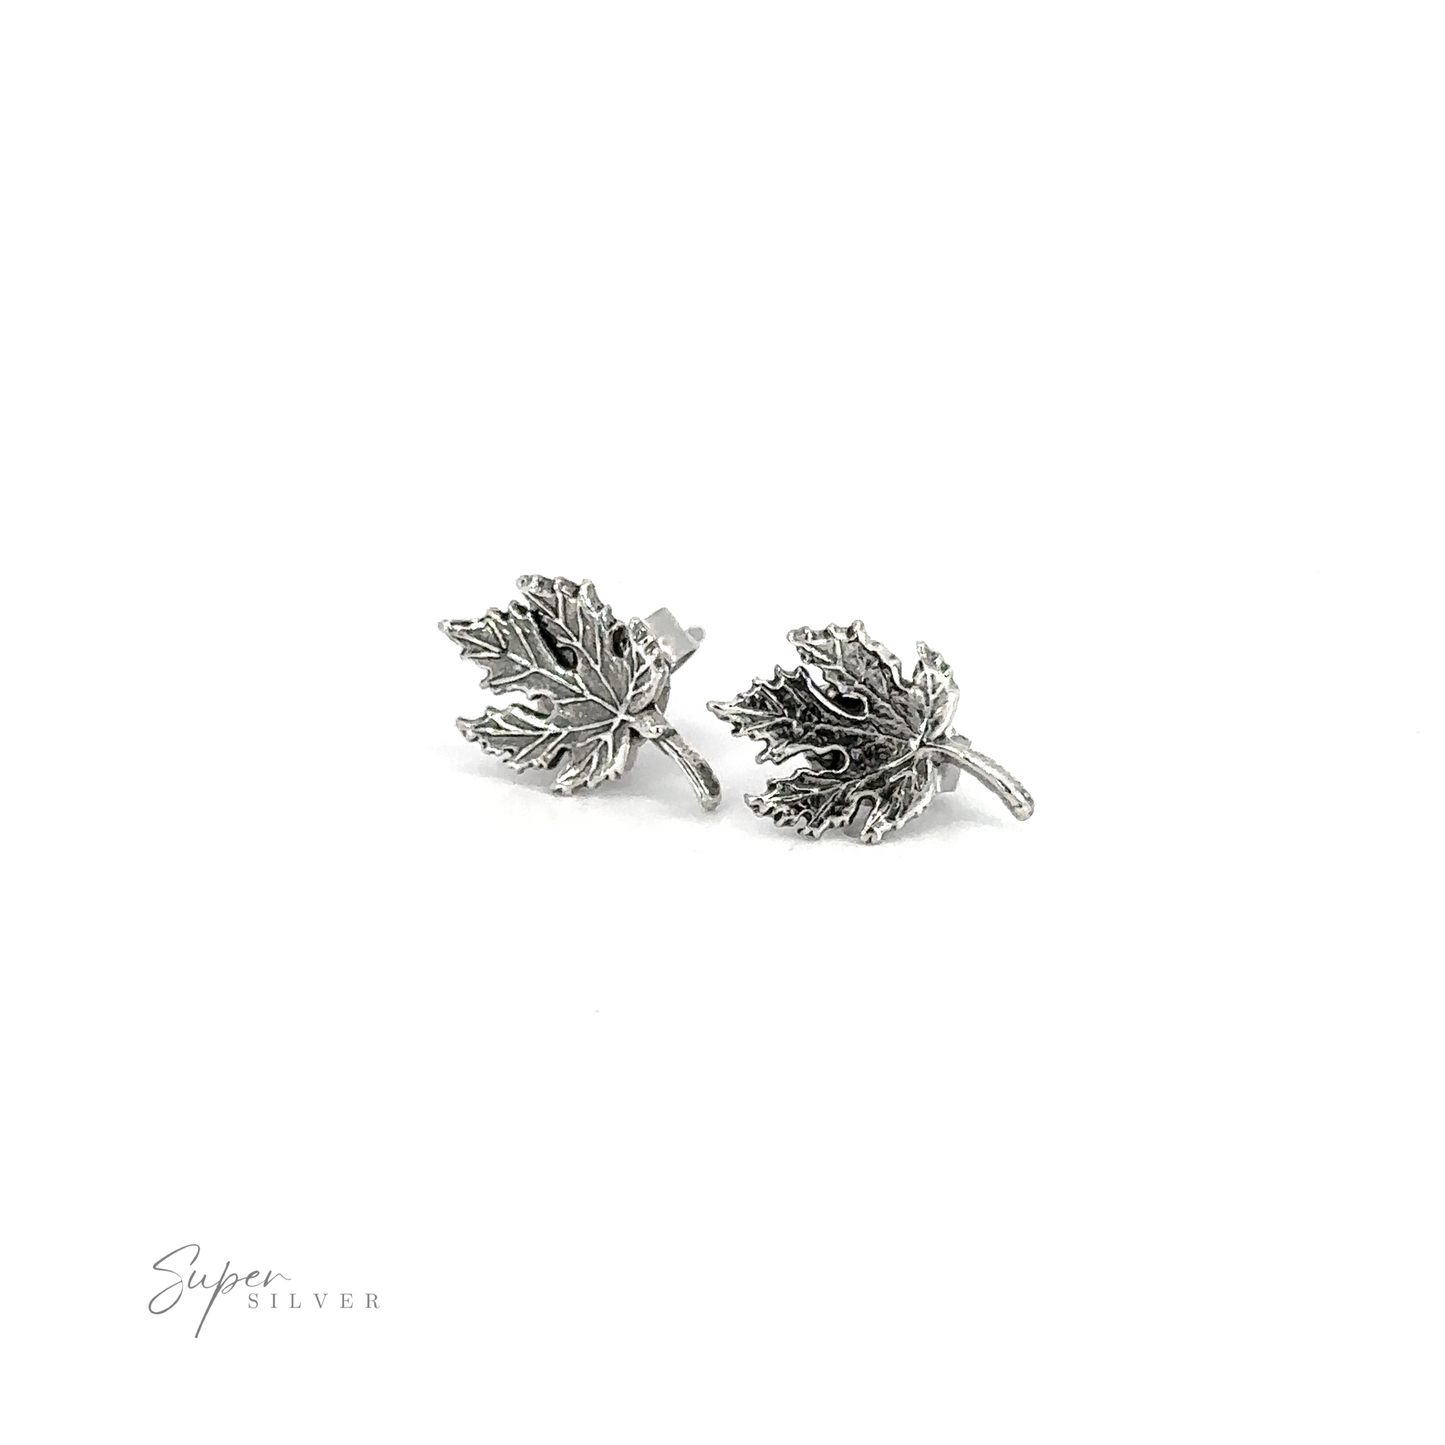 A pair of Maple Leaf Studs on a white background.